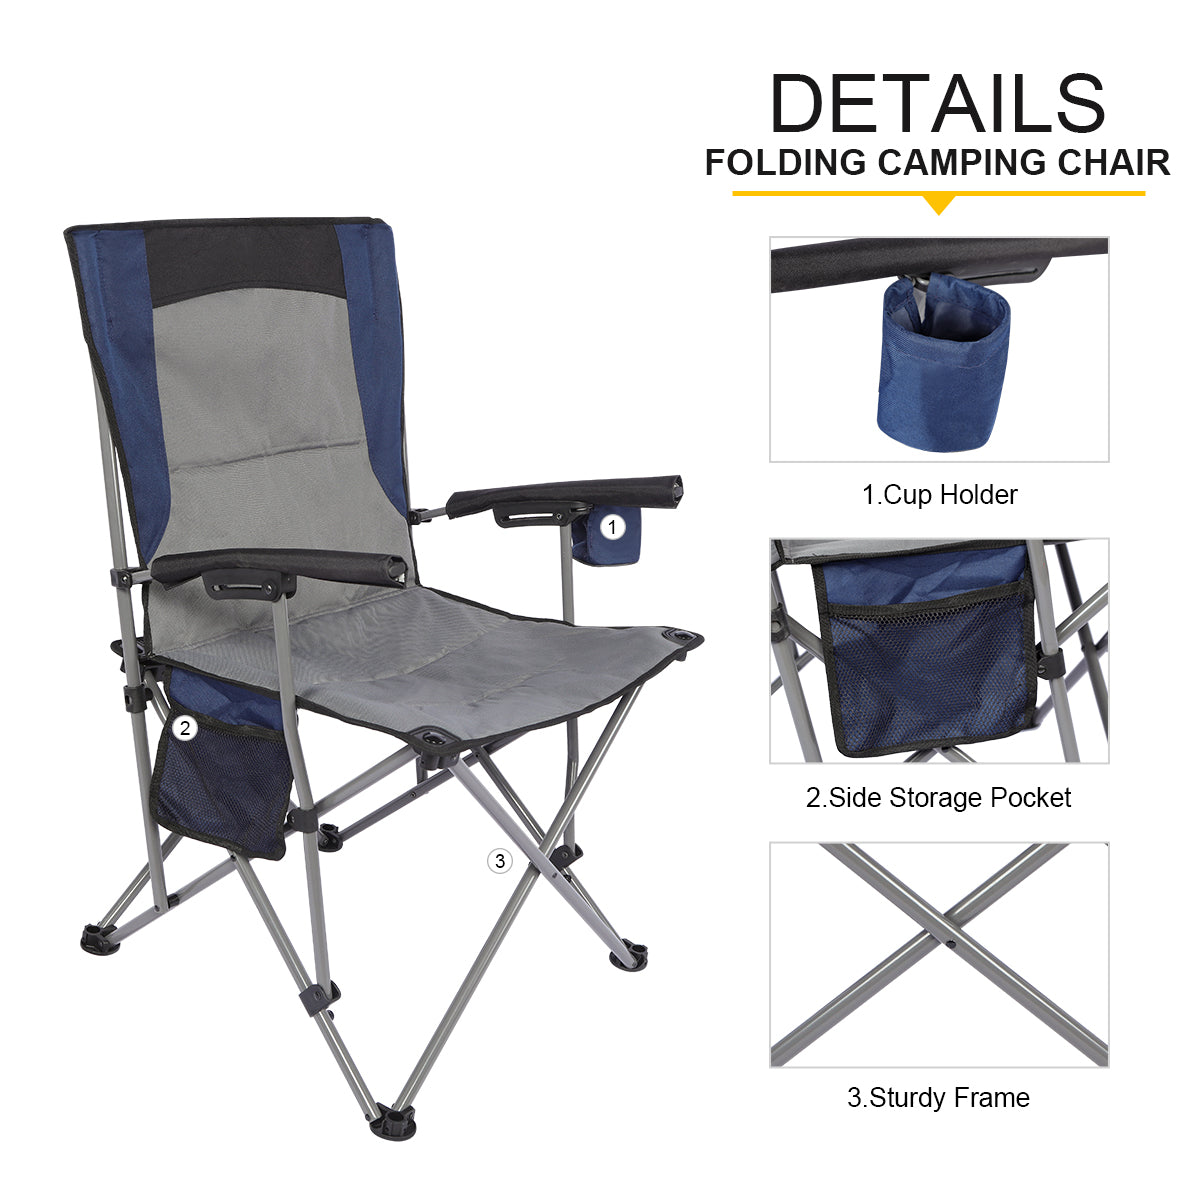 PORTAL Camping Chair Folding Portable Quad Mesh Back with Cup Holder Pocket and Hard Armrest, Supports 300 lbs, 23. 6 * 18. 5 * 36. 6